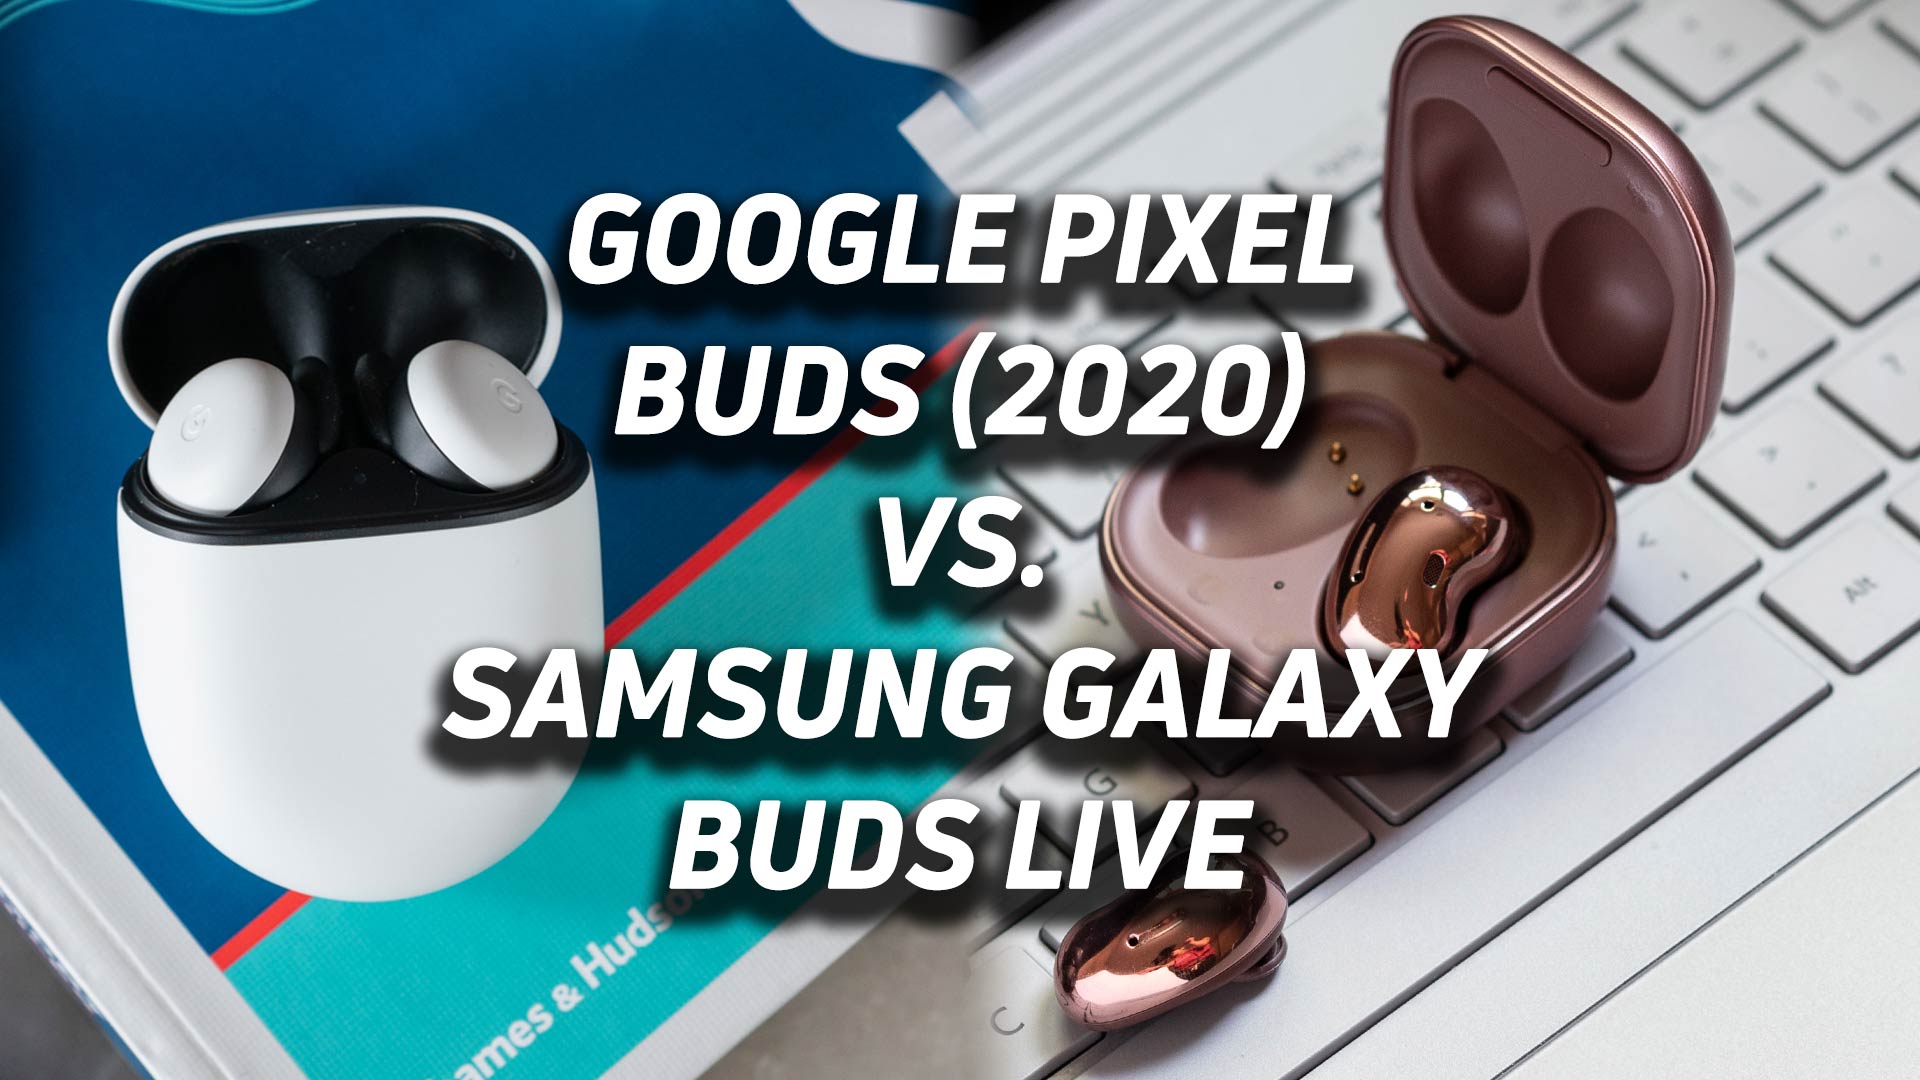 The Google Pixel Buds (2020) and Samsung Galaxy Buds Live true wireless earbuds consolidated into one blended image with versus text overlaid.